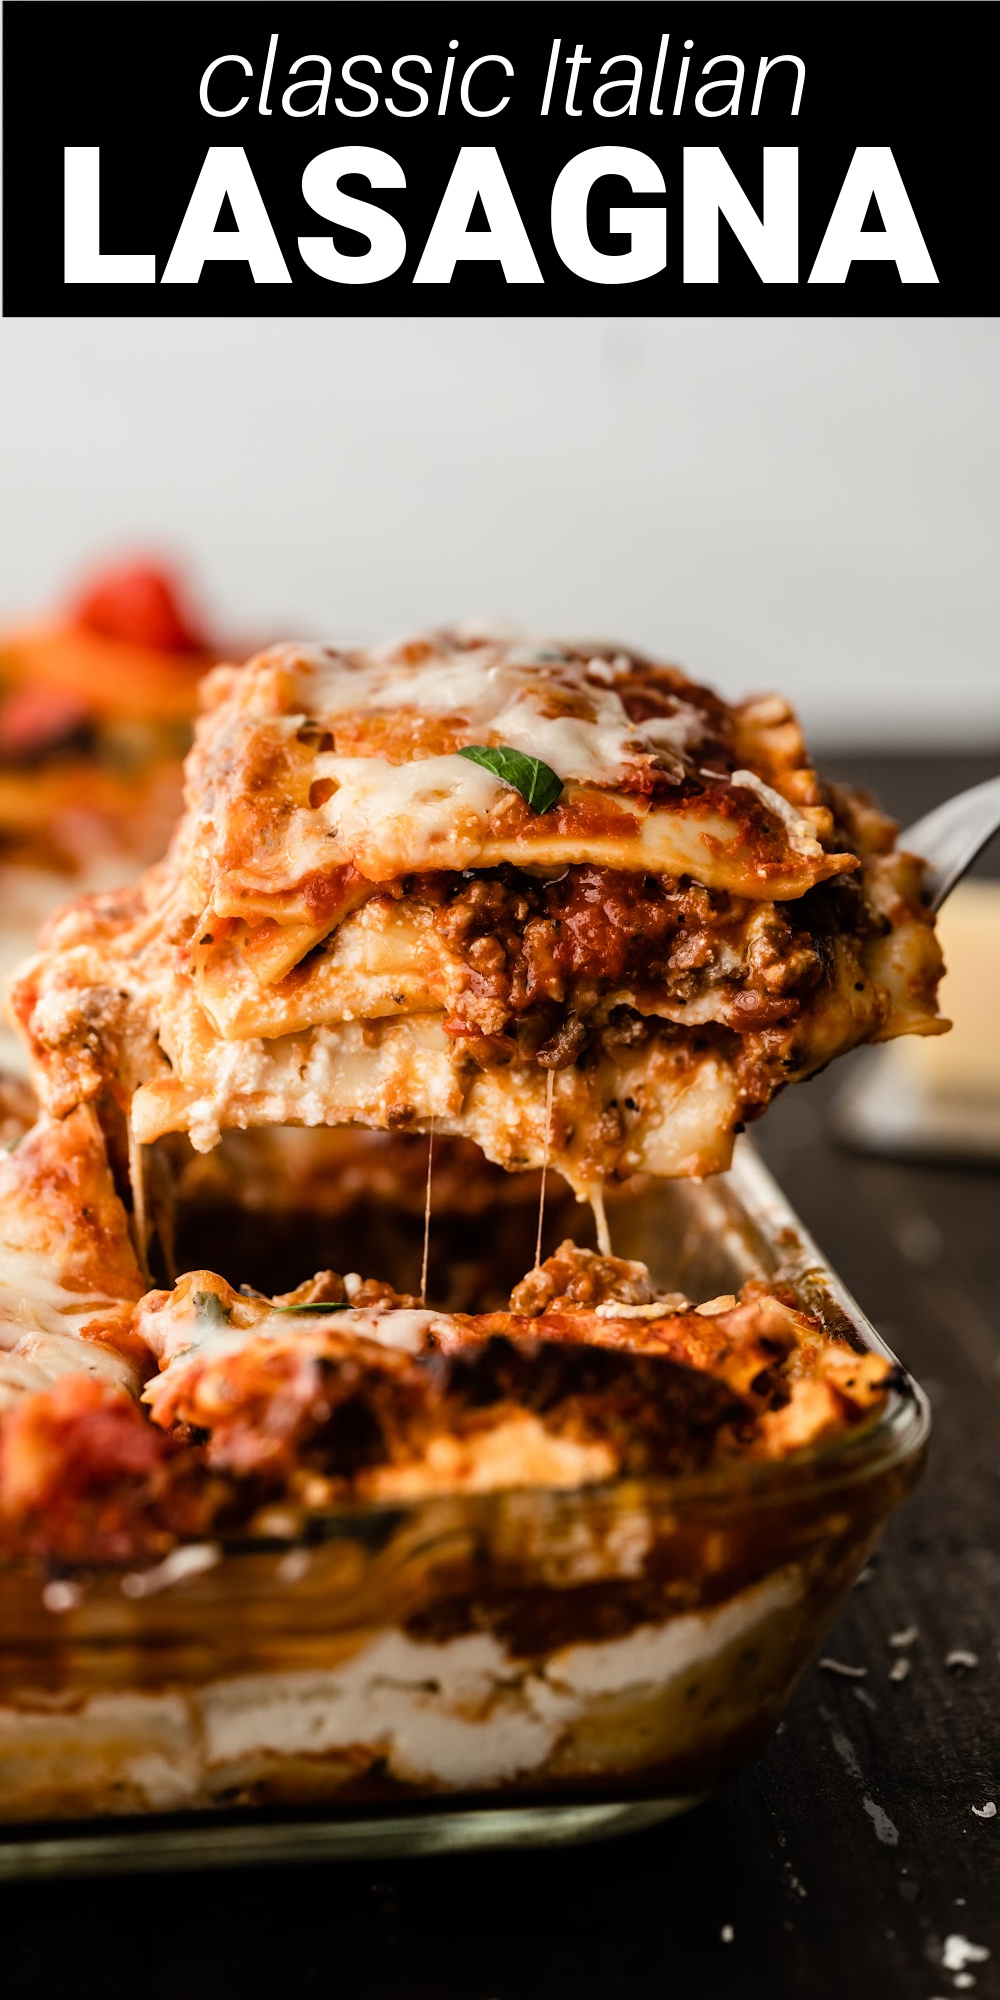 Homemade Classic Italian Lasagna is easier to make than you think. Whether hosting dinner for a crowd or wanting a dish that’s great for meal prepping, this recipe is one you’ll want to make time and time again. 